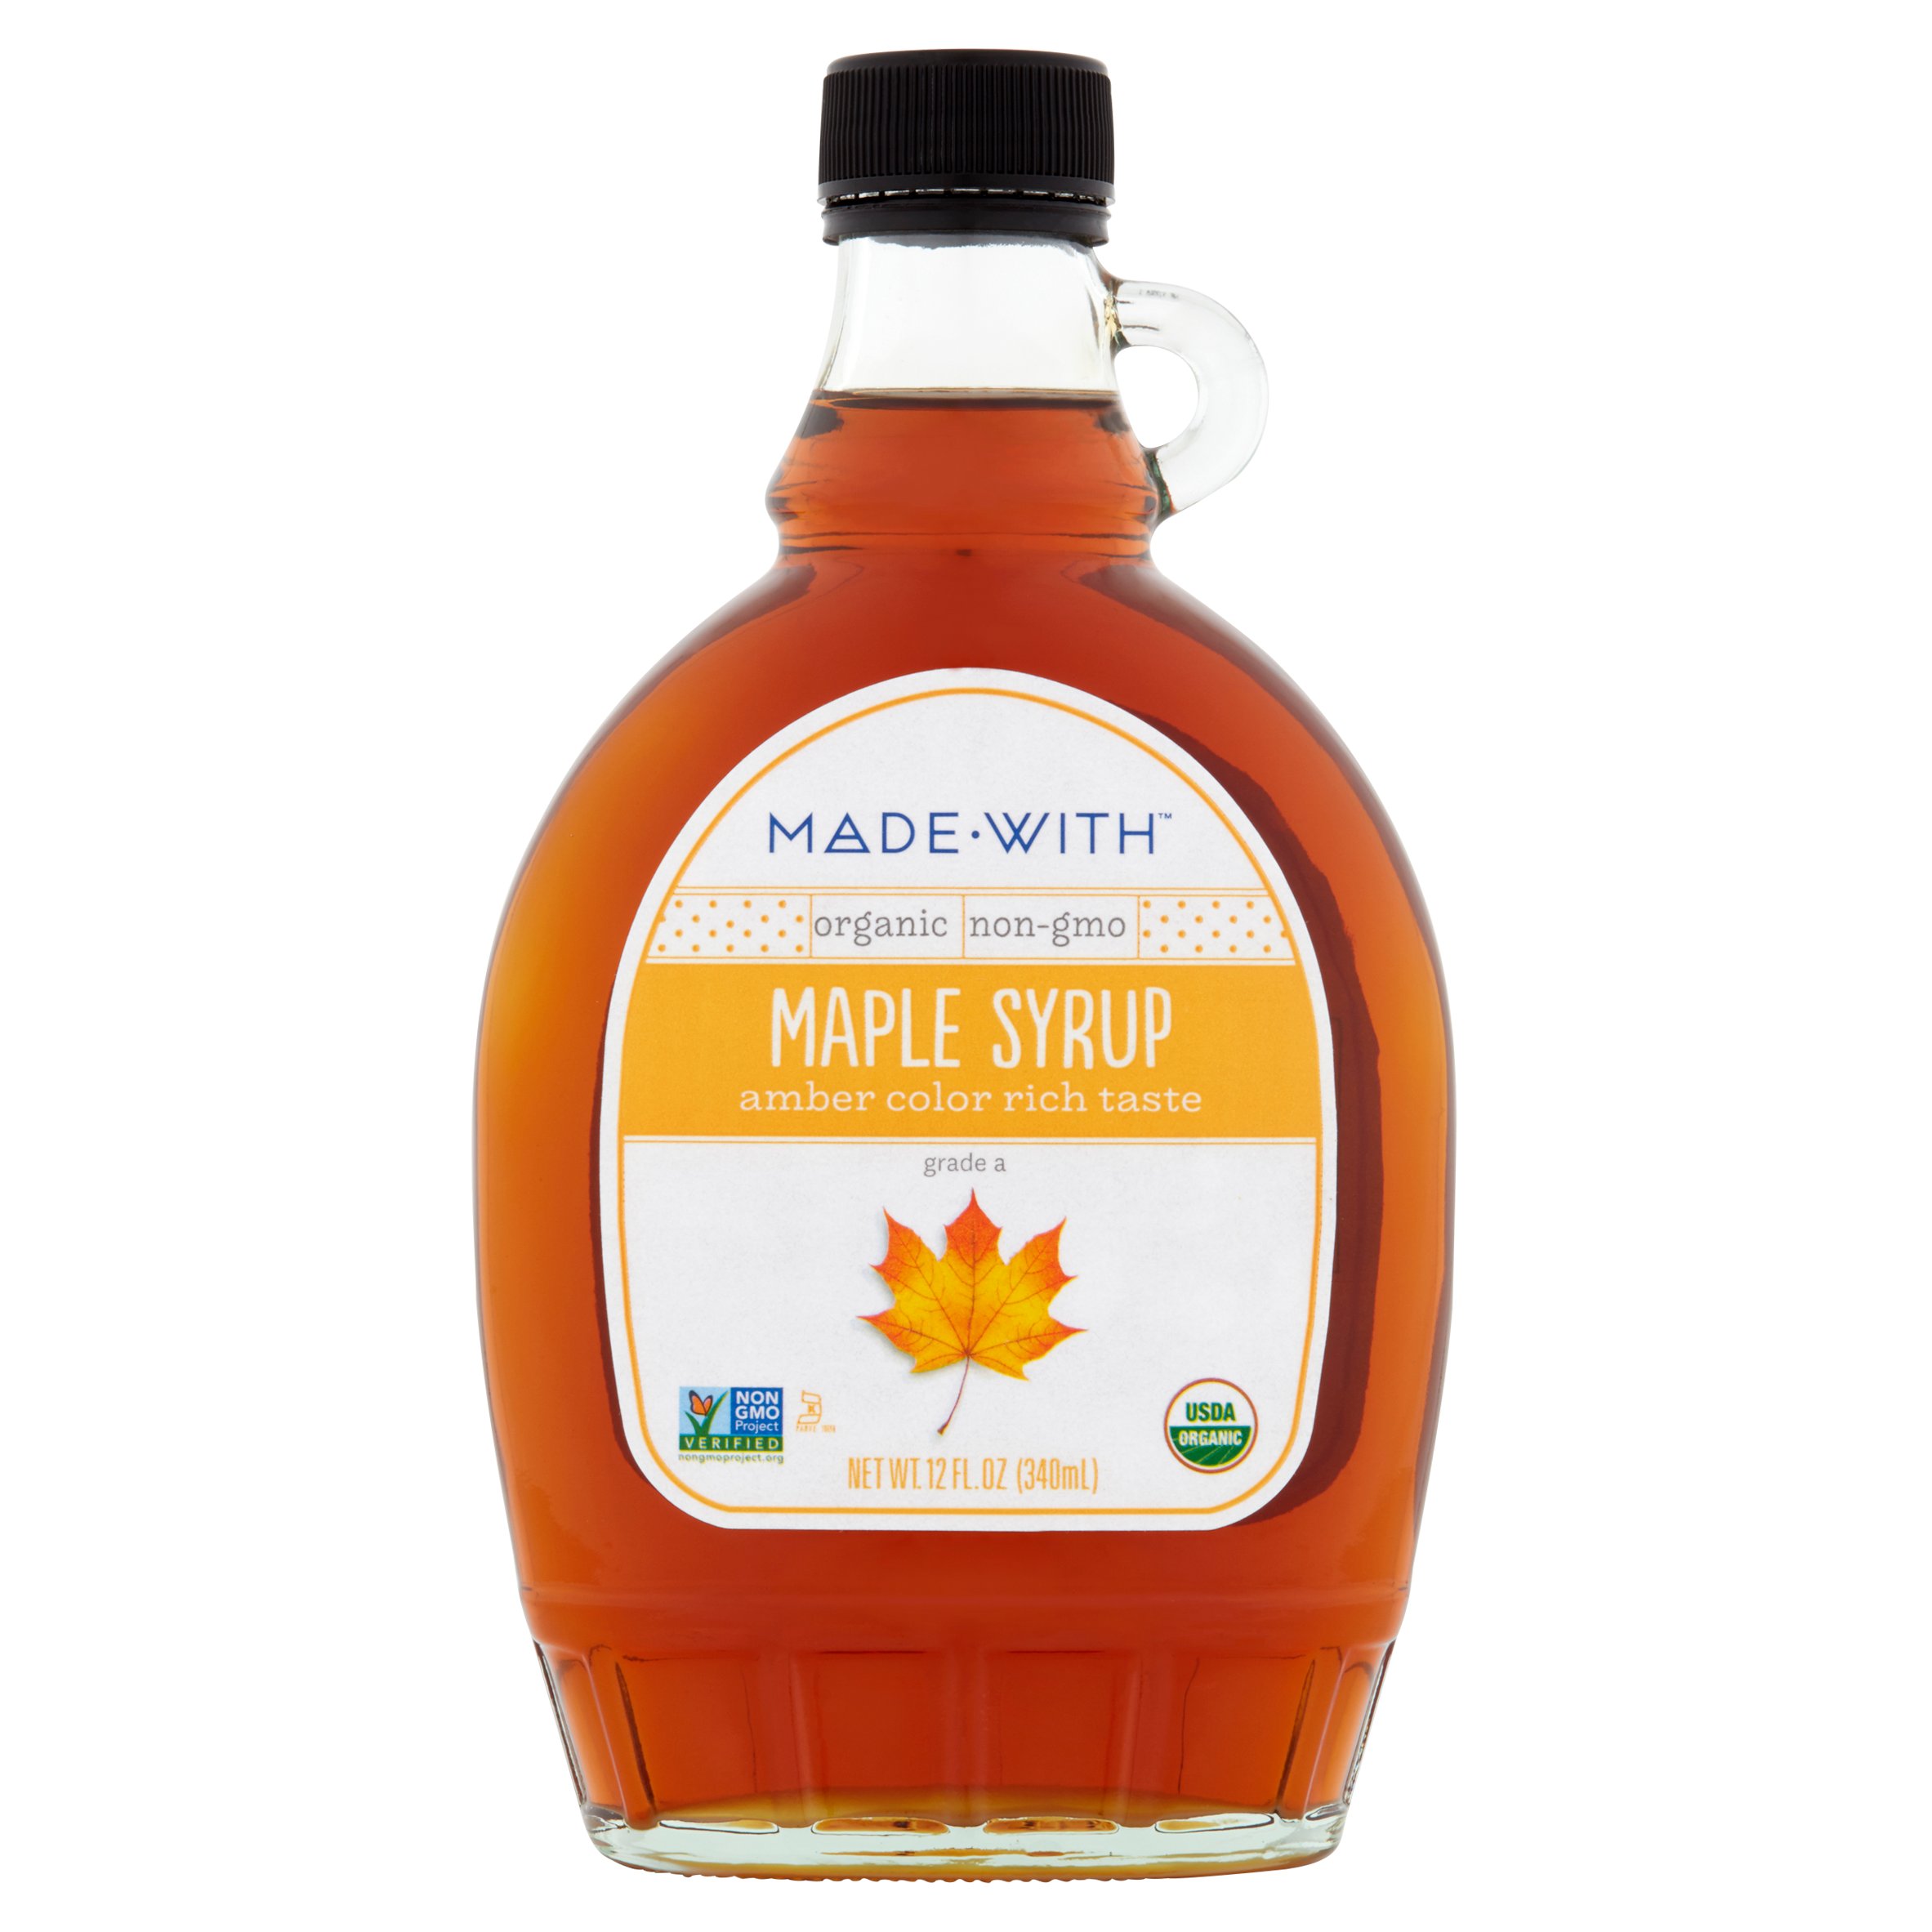 Made With Syrup Maple Grd A Ambr Org,12 Fo (Pack Of 12) - image 1 of 4